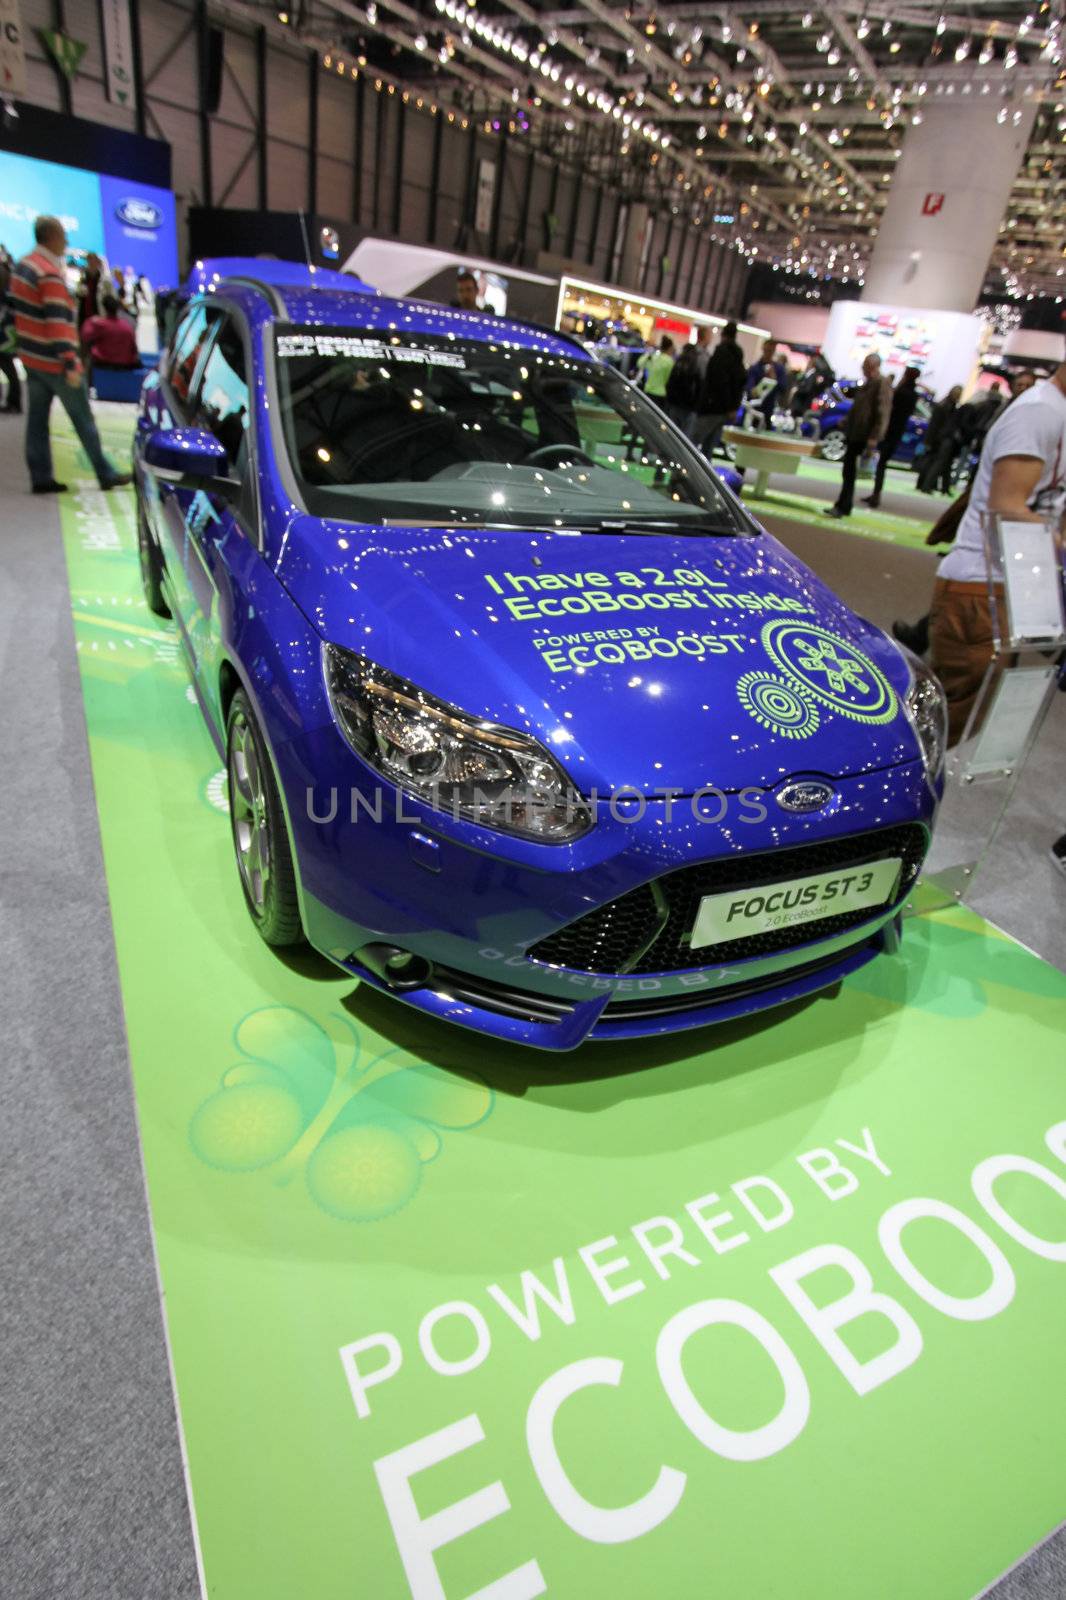 GENEVA - MARCH 8 : blue Ford Focus ST3 ecoboost on display at the 83st International Motor Show Palexpo - Geneva on March 8, 2013 in Geneva, Switzerland.